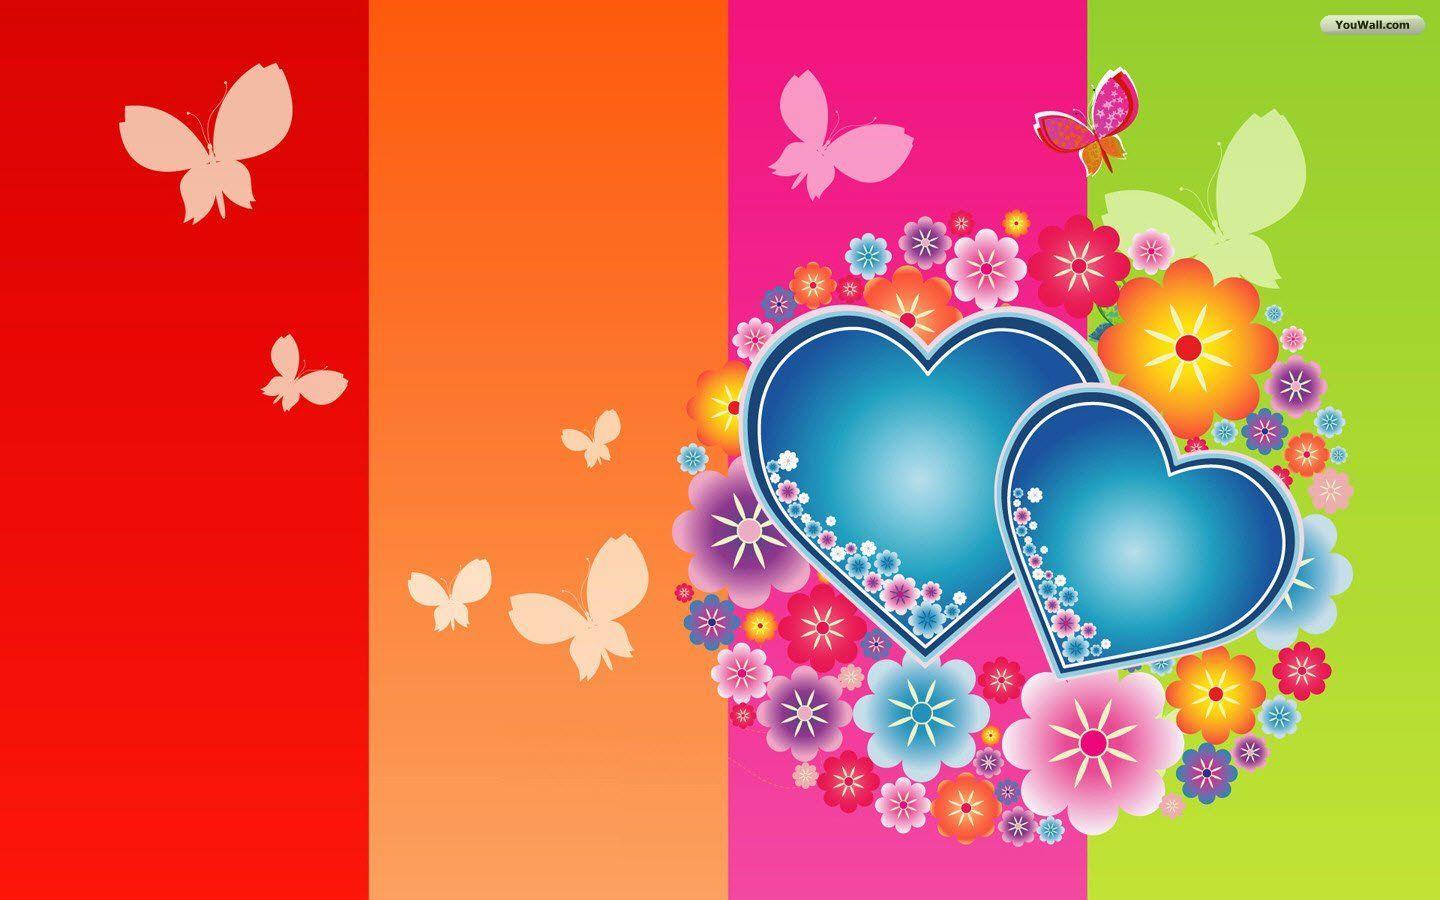 Flowers and hearts wallpaper